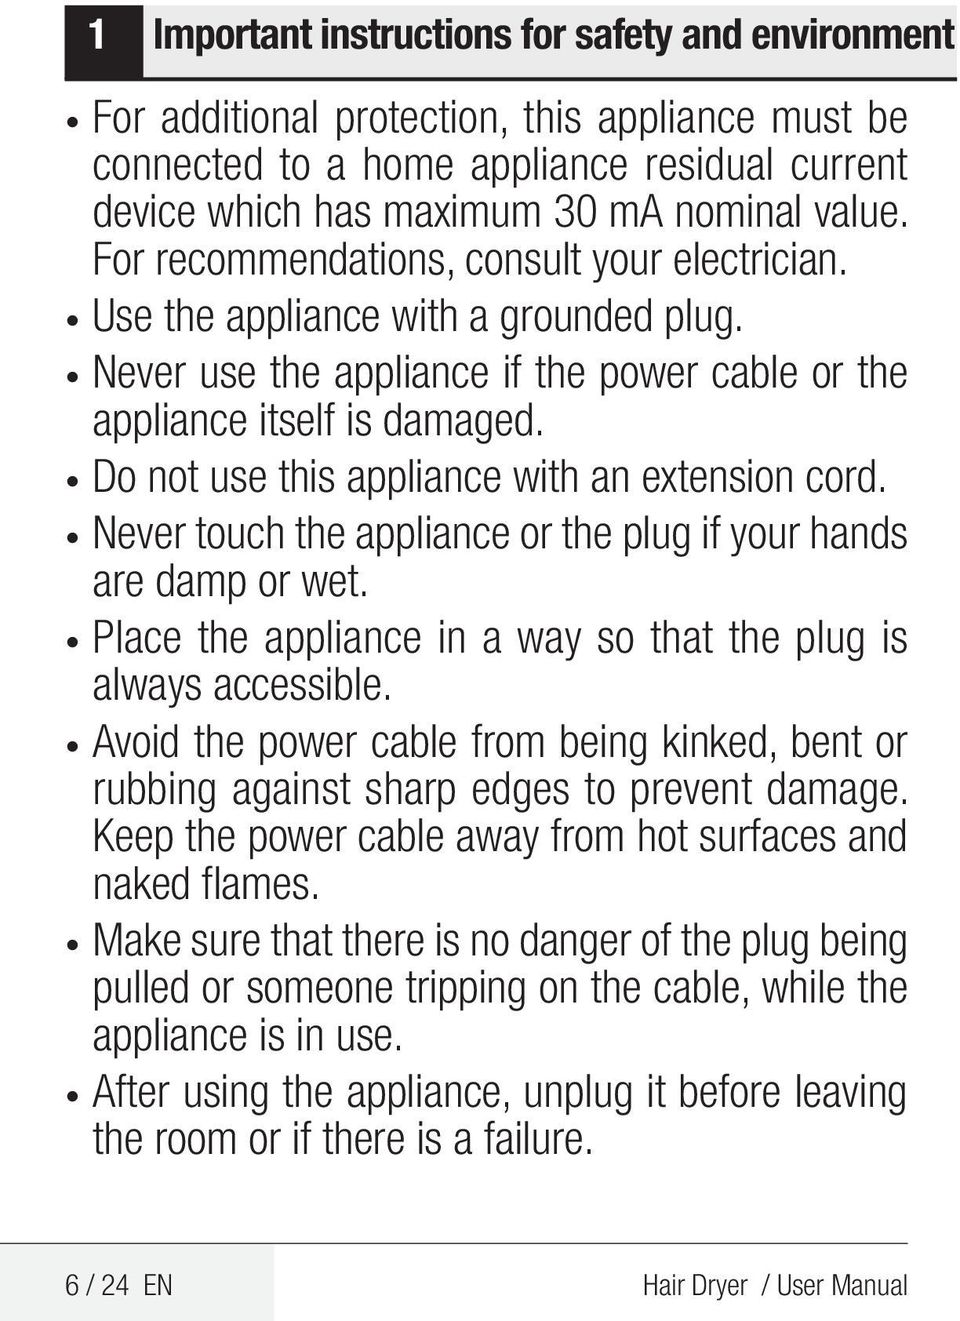 Do not use this appliance with an extension cord. Never touch the appliance or the plug if your hands are damp or wet. Place the appliance in a way so that the plug is always accessible.